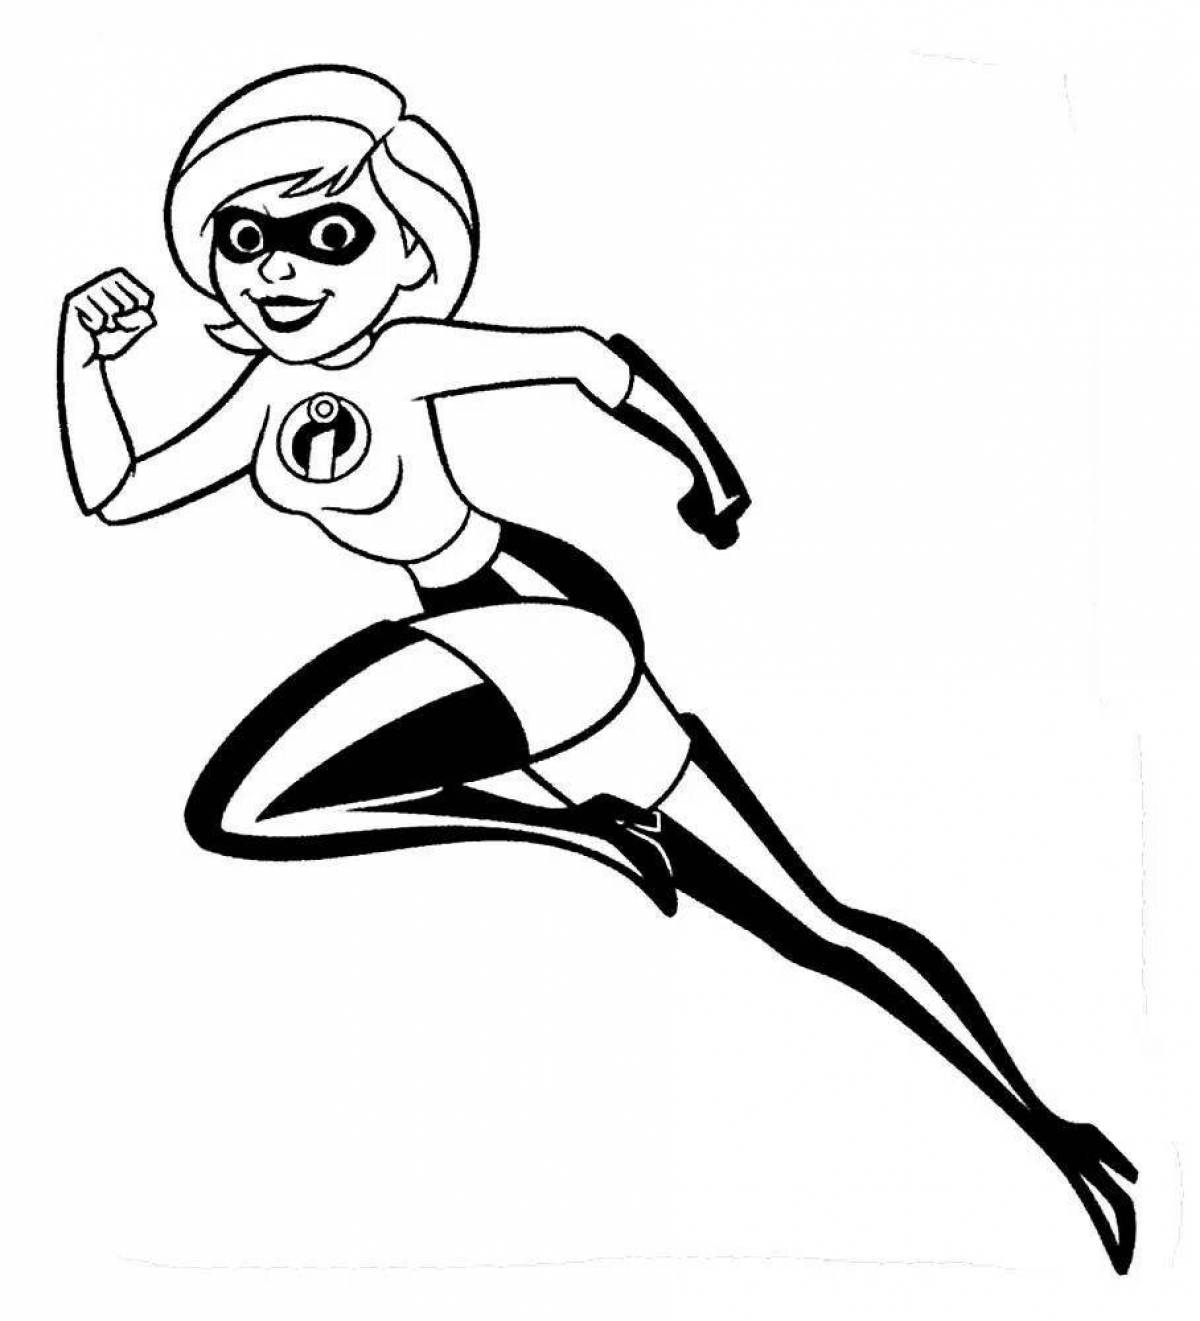 Creative Incredibles coloring book for kids